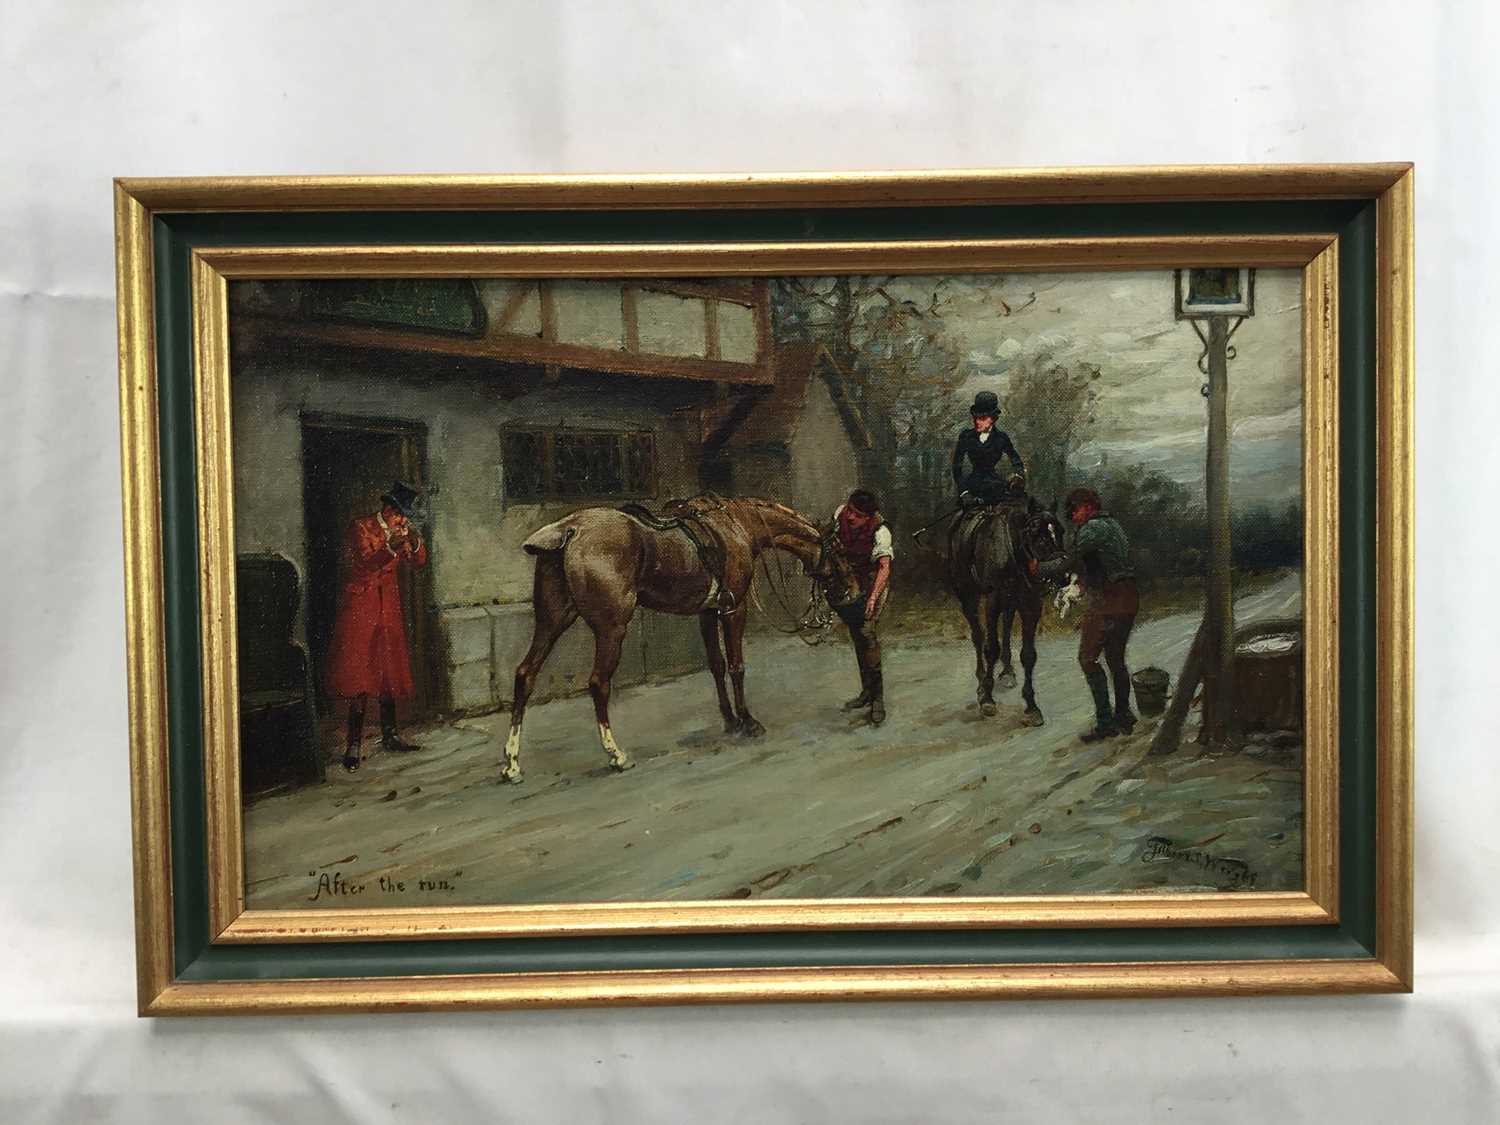 Filbert S. Wright 19th century, oil on canvas, "After the Run", huntsmen and horses by an inn, sign - Image 2 of 3